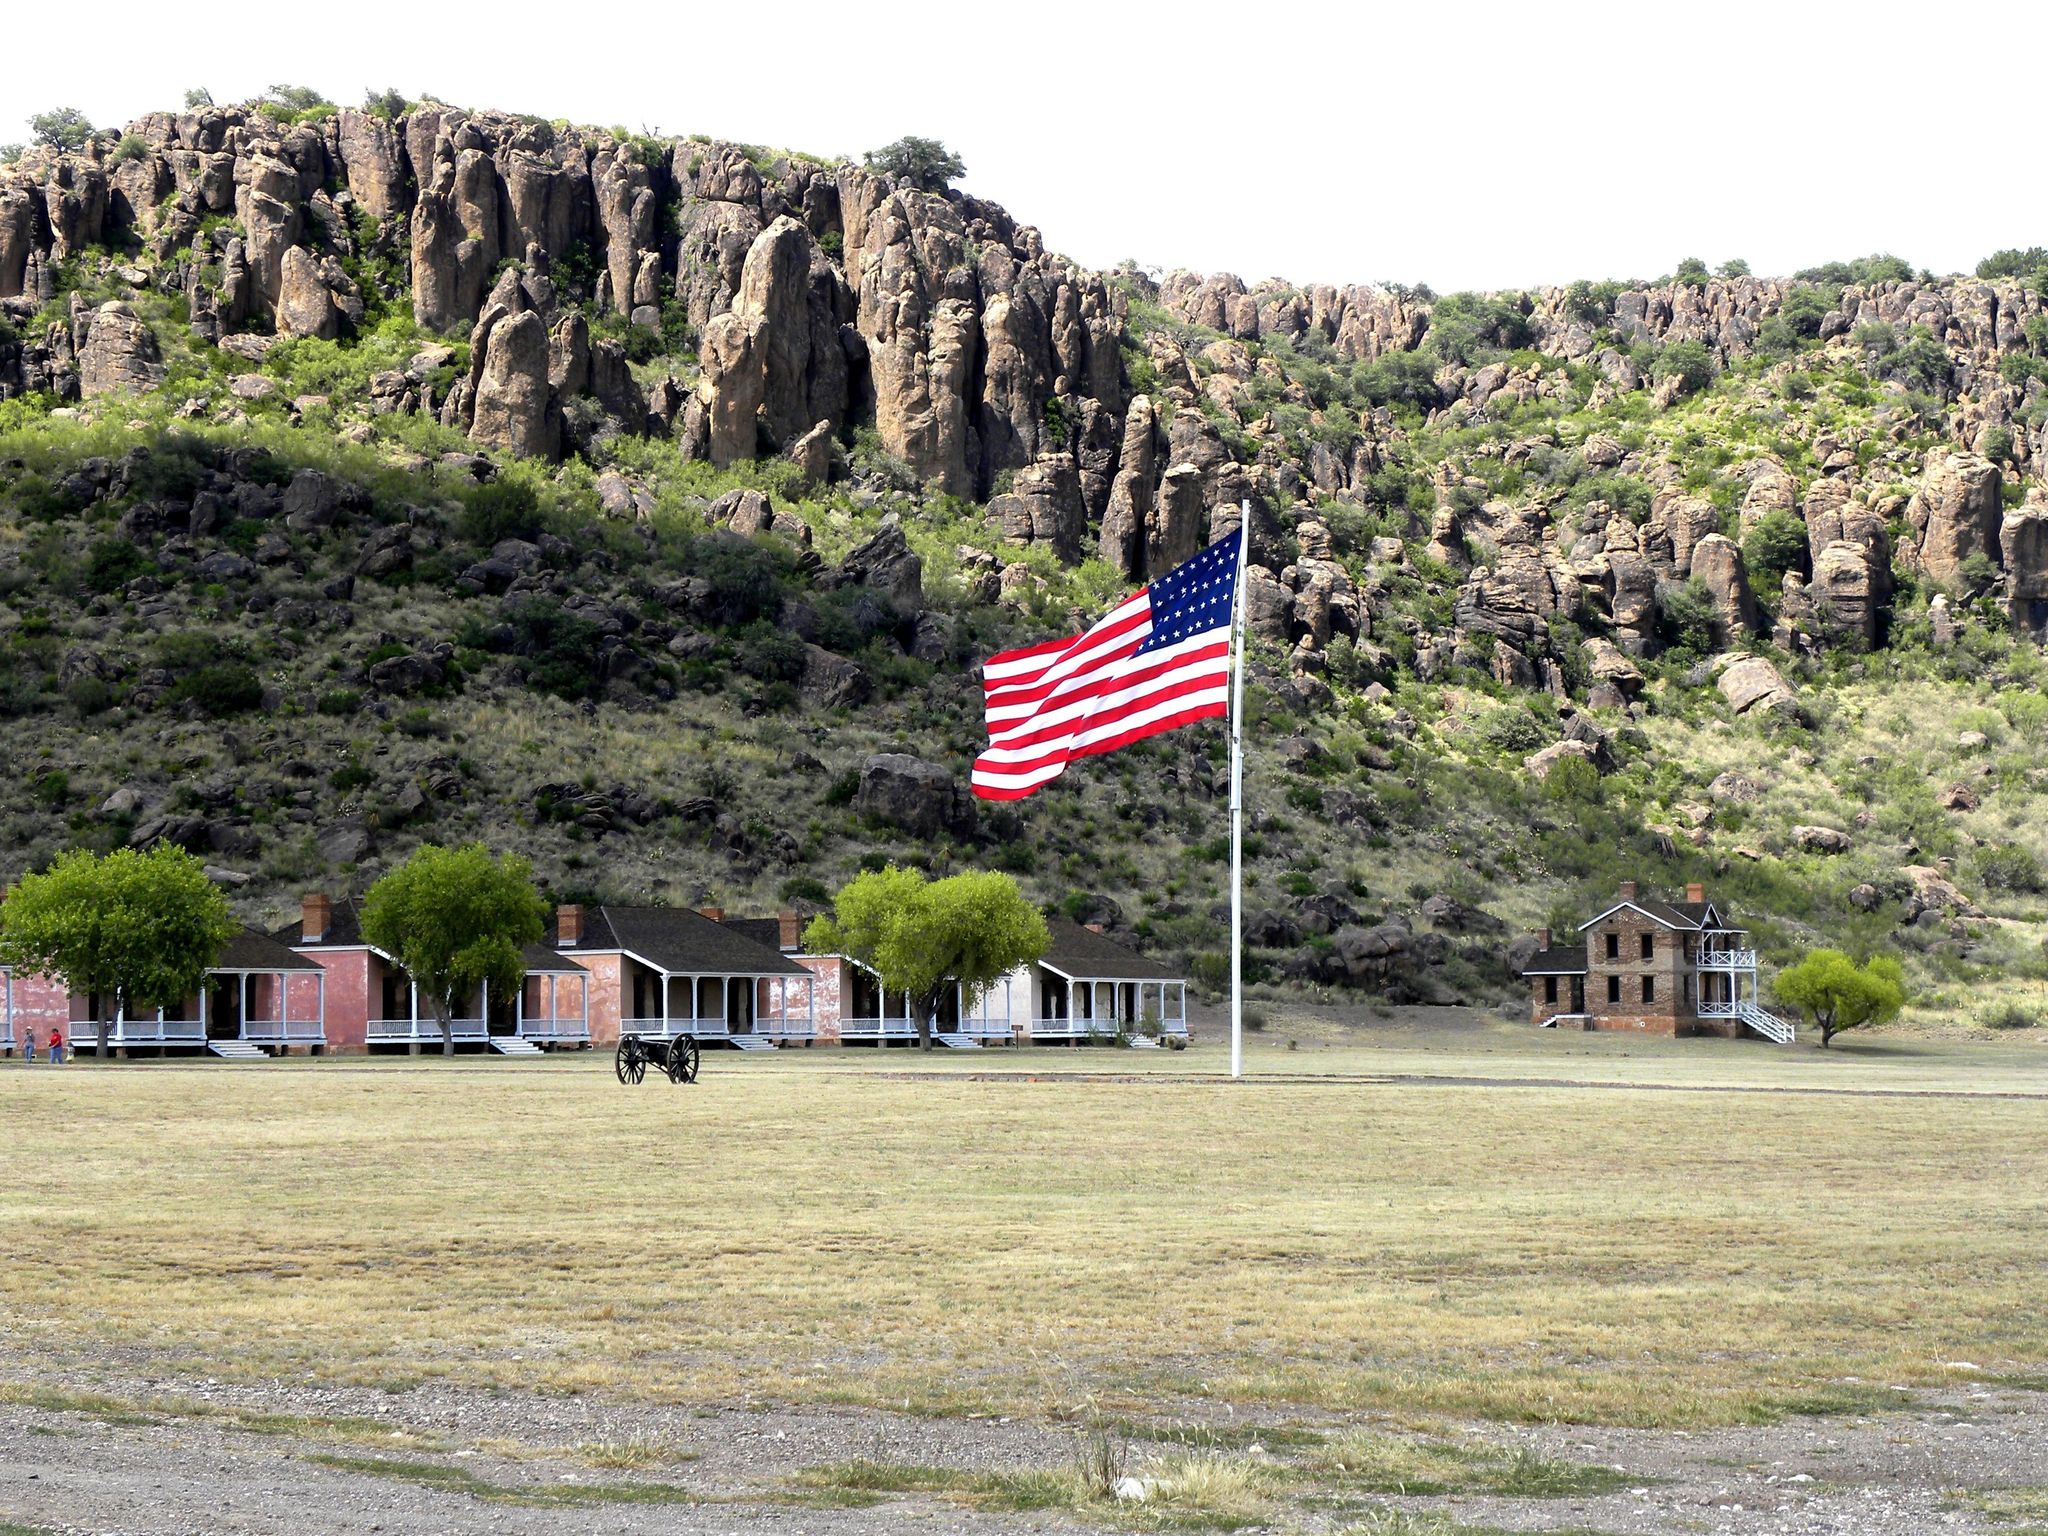 Garrison flag flying over the post within the box canyon Fort Davis is located.